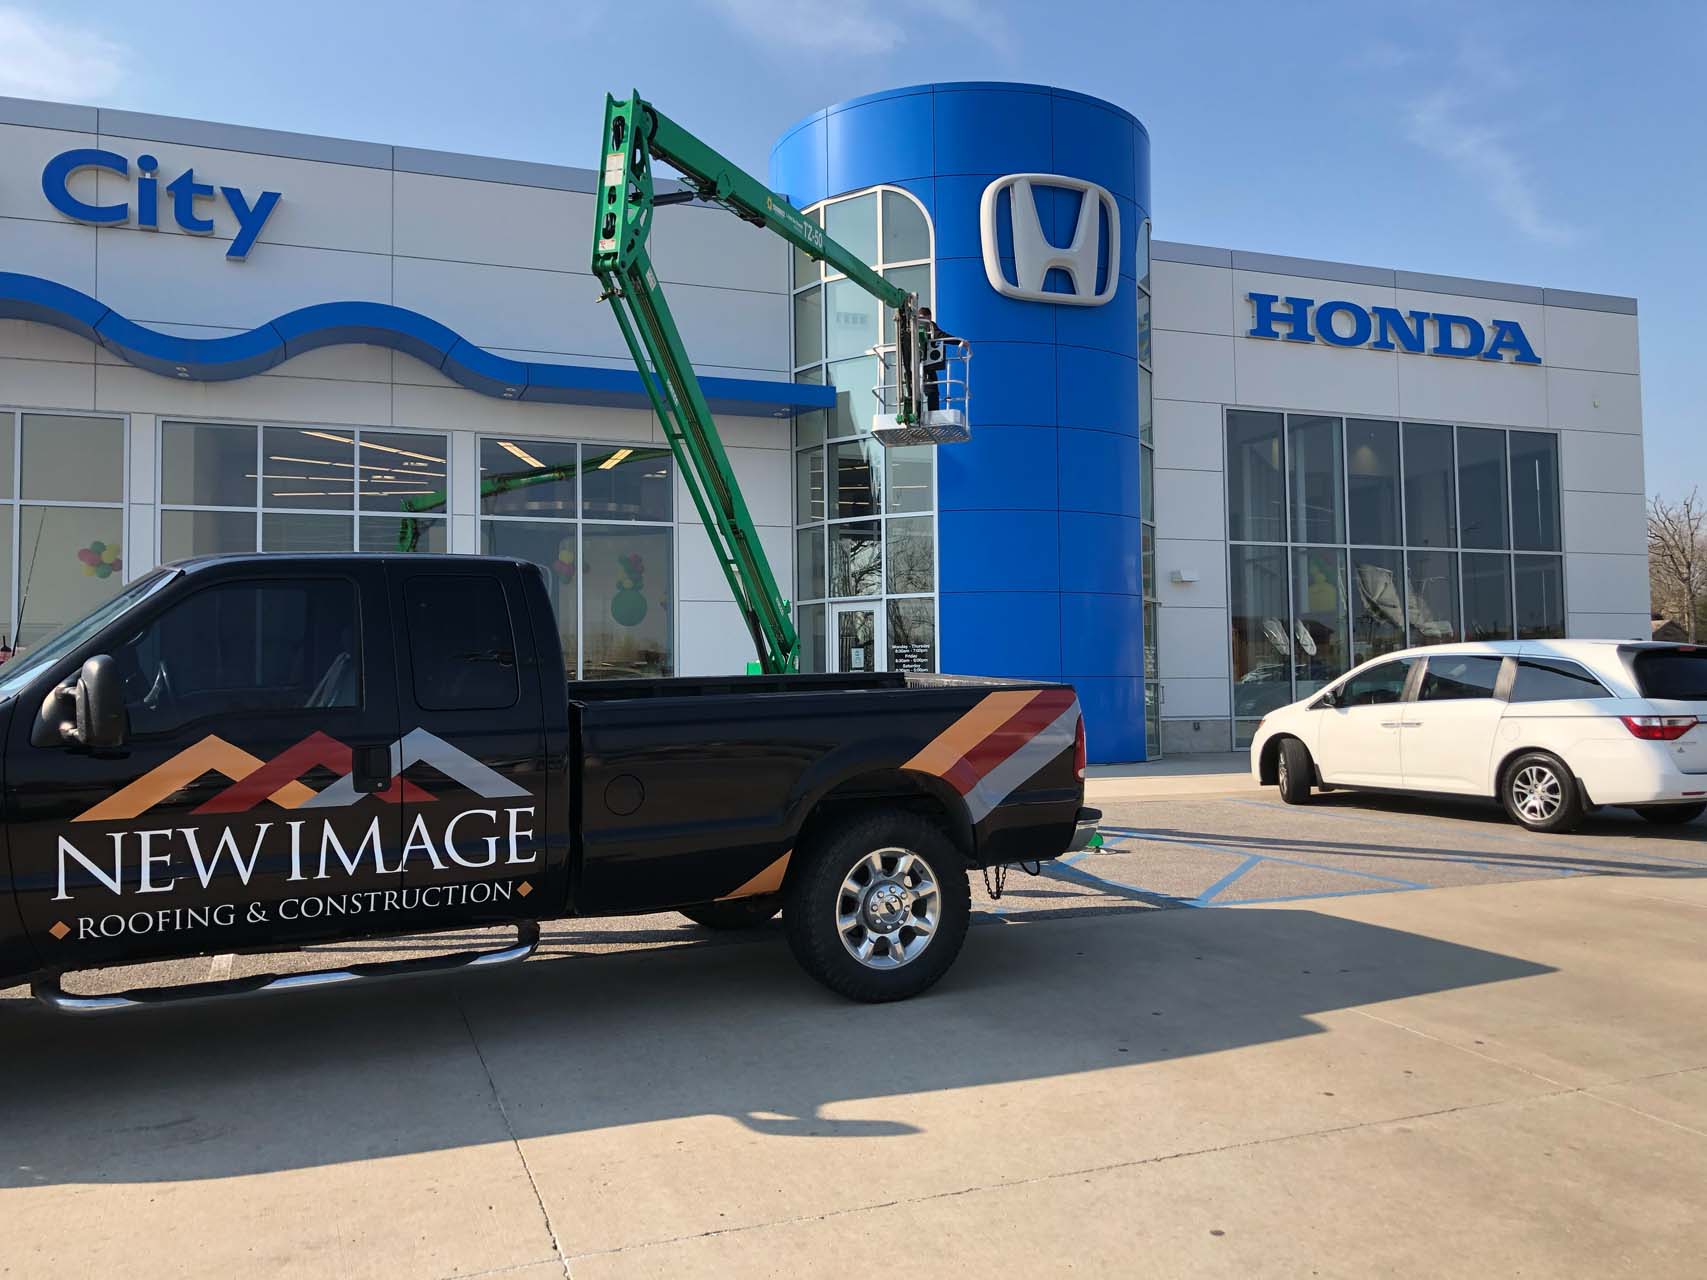 New Image Roofing & Construction install roofing on a Honda dealership